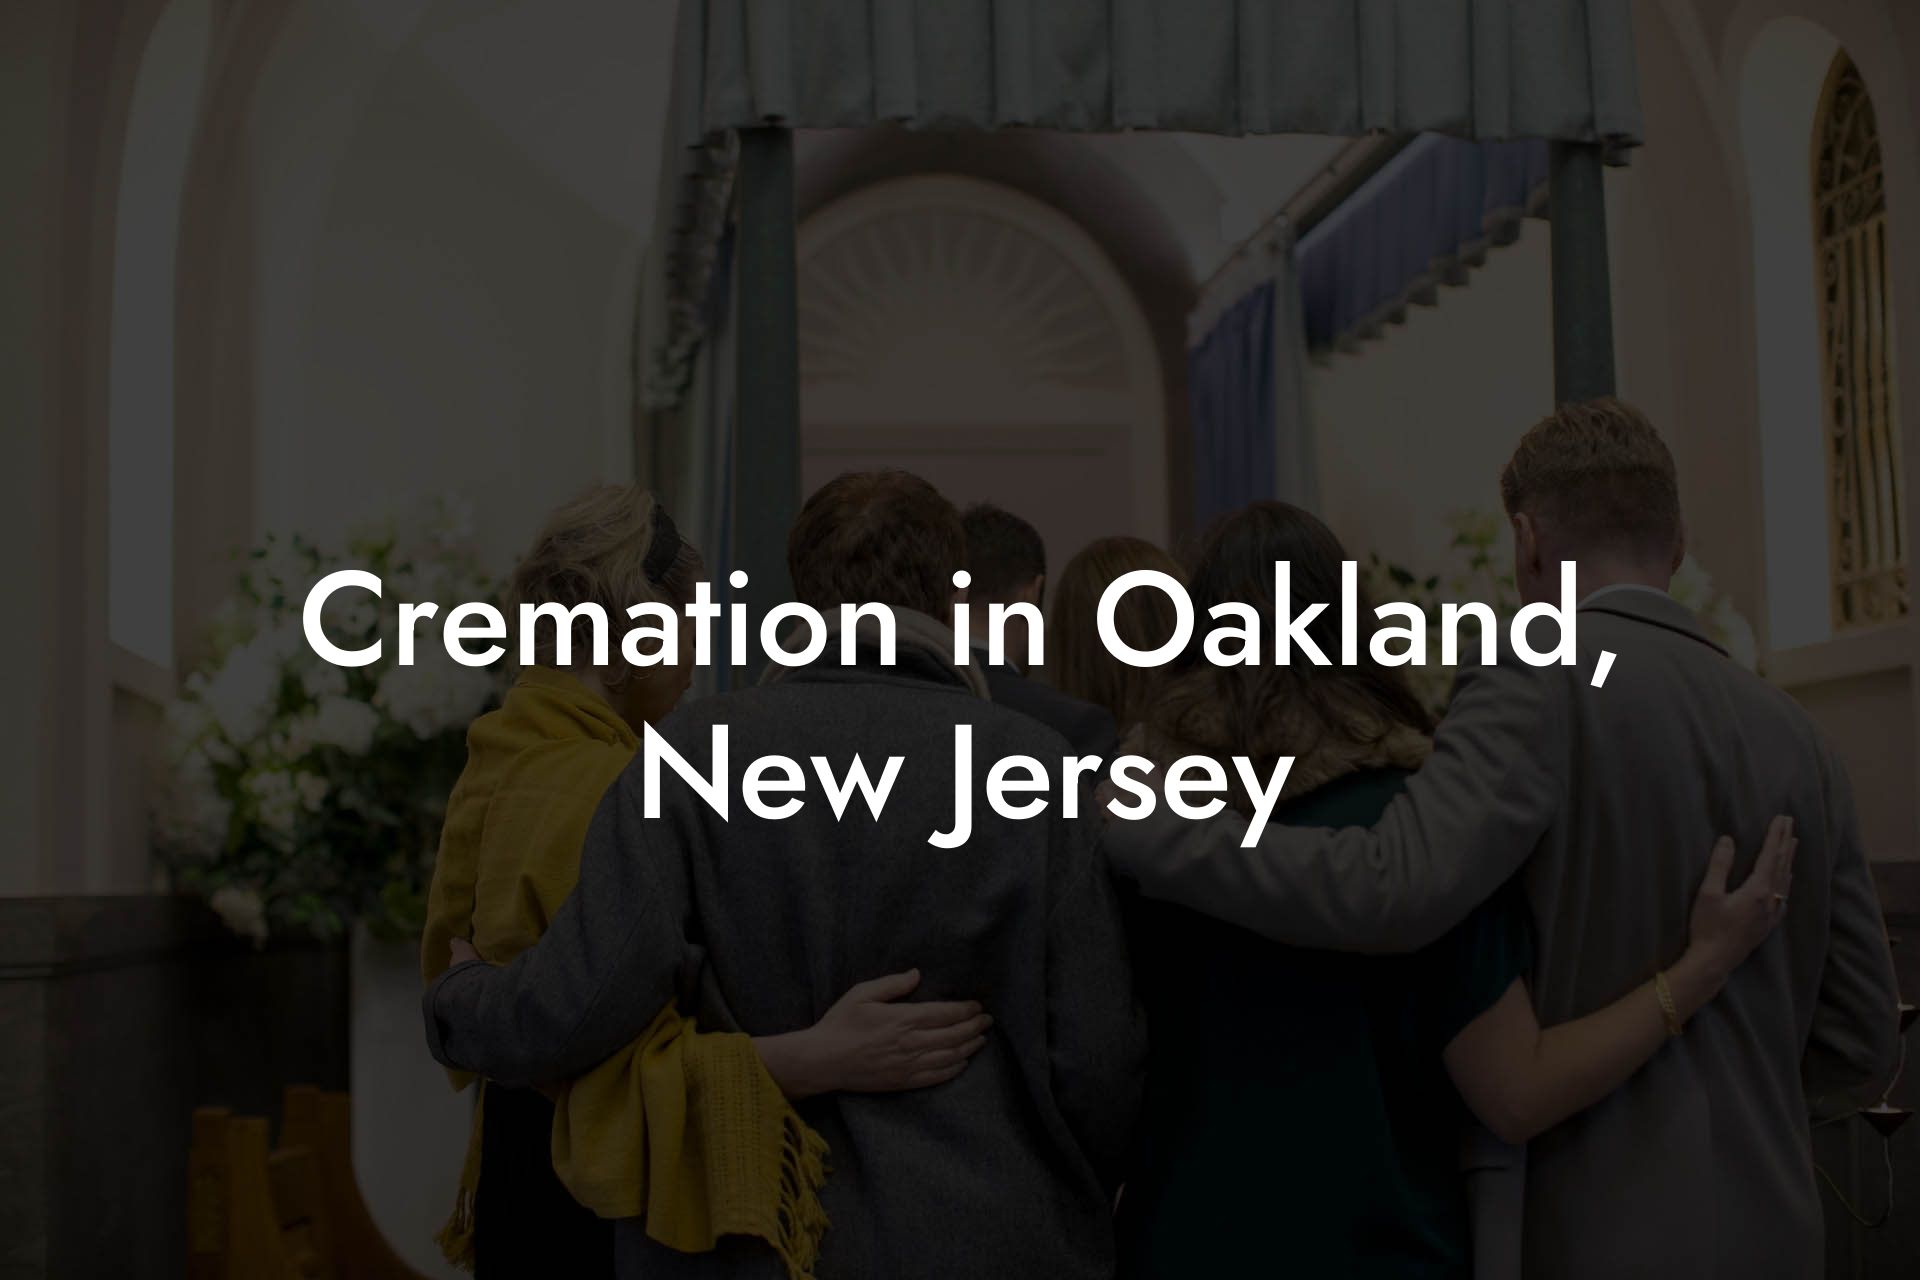 Cremation in Oakland, New Jersey